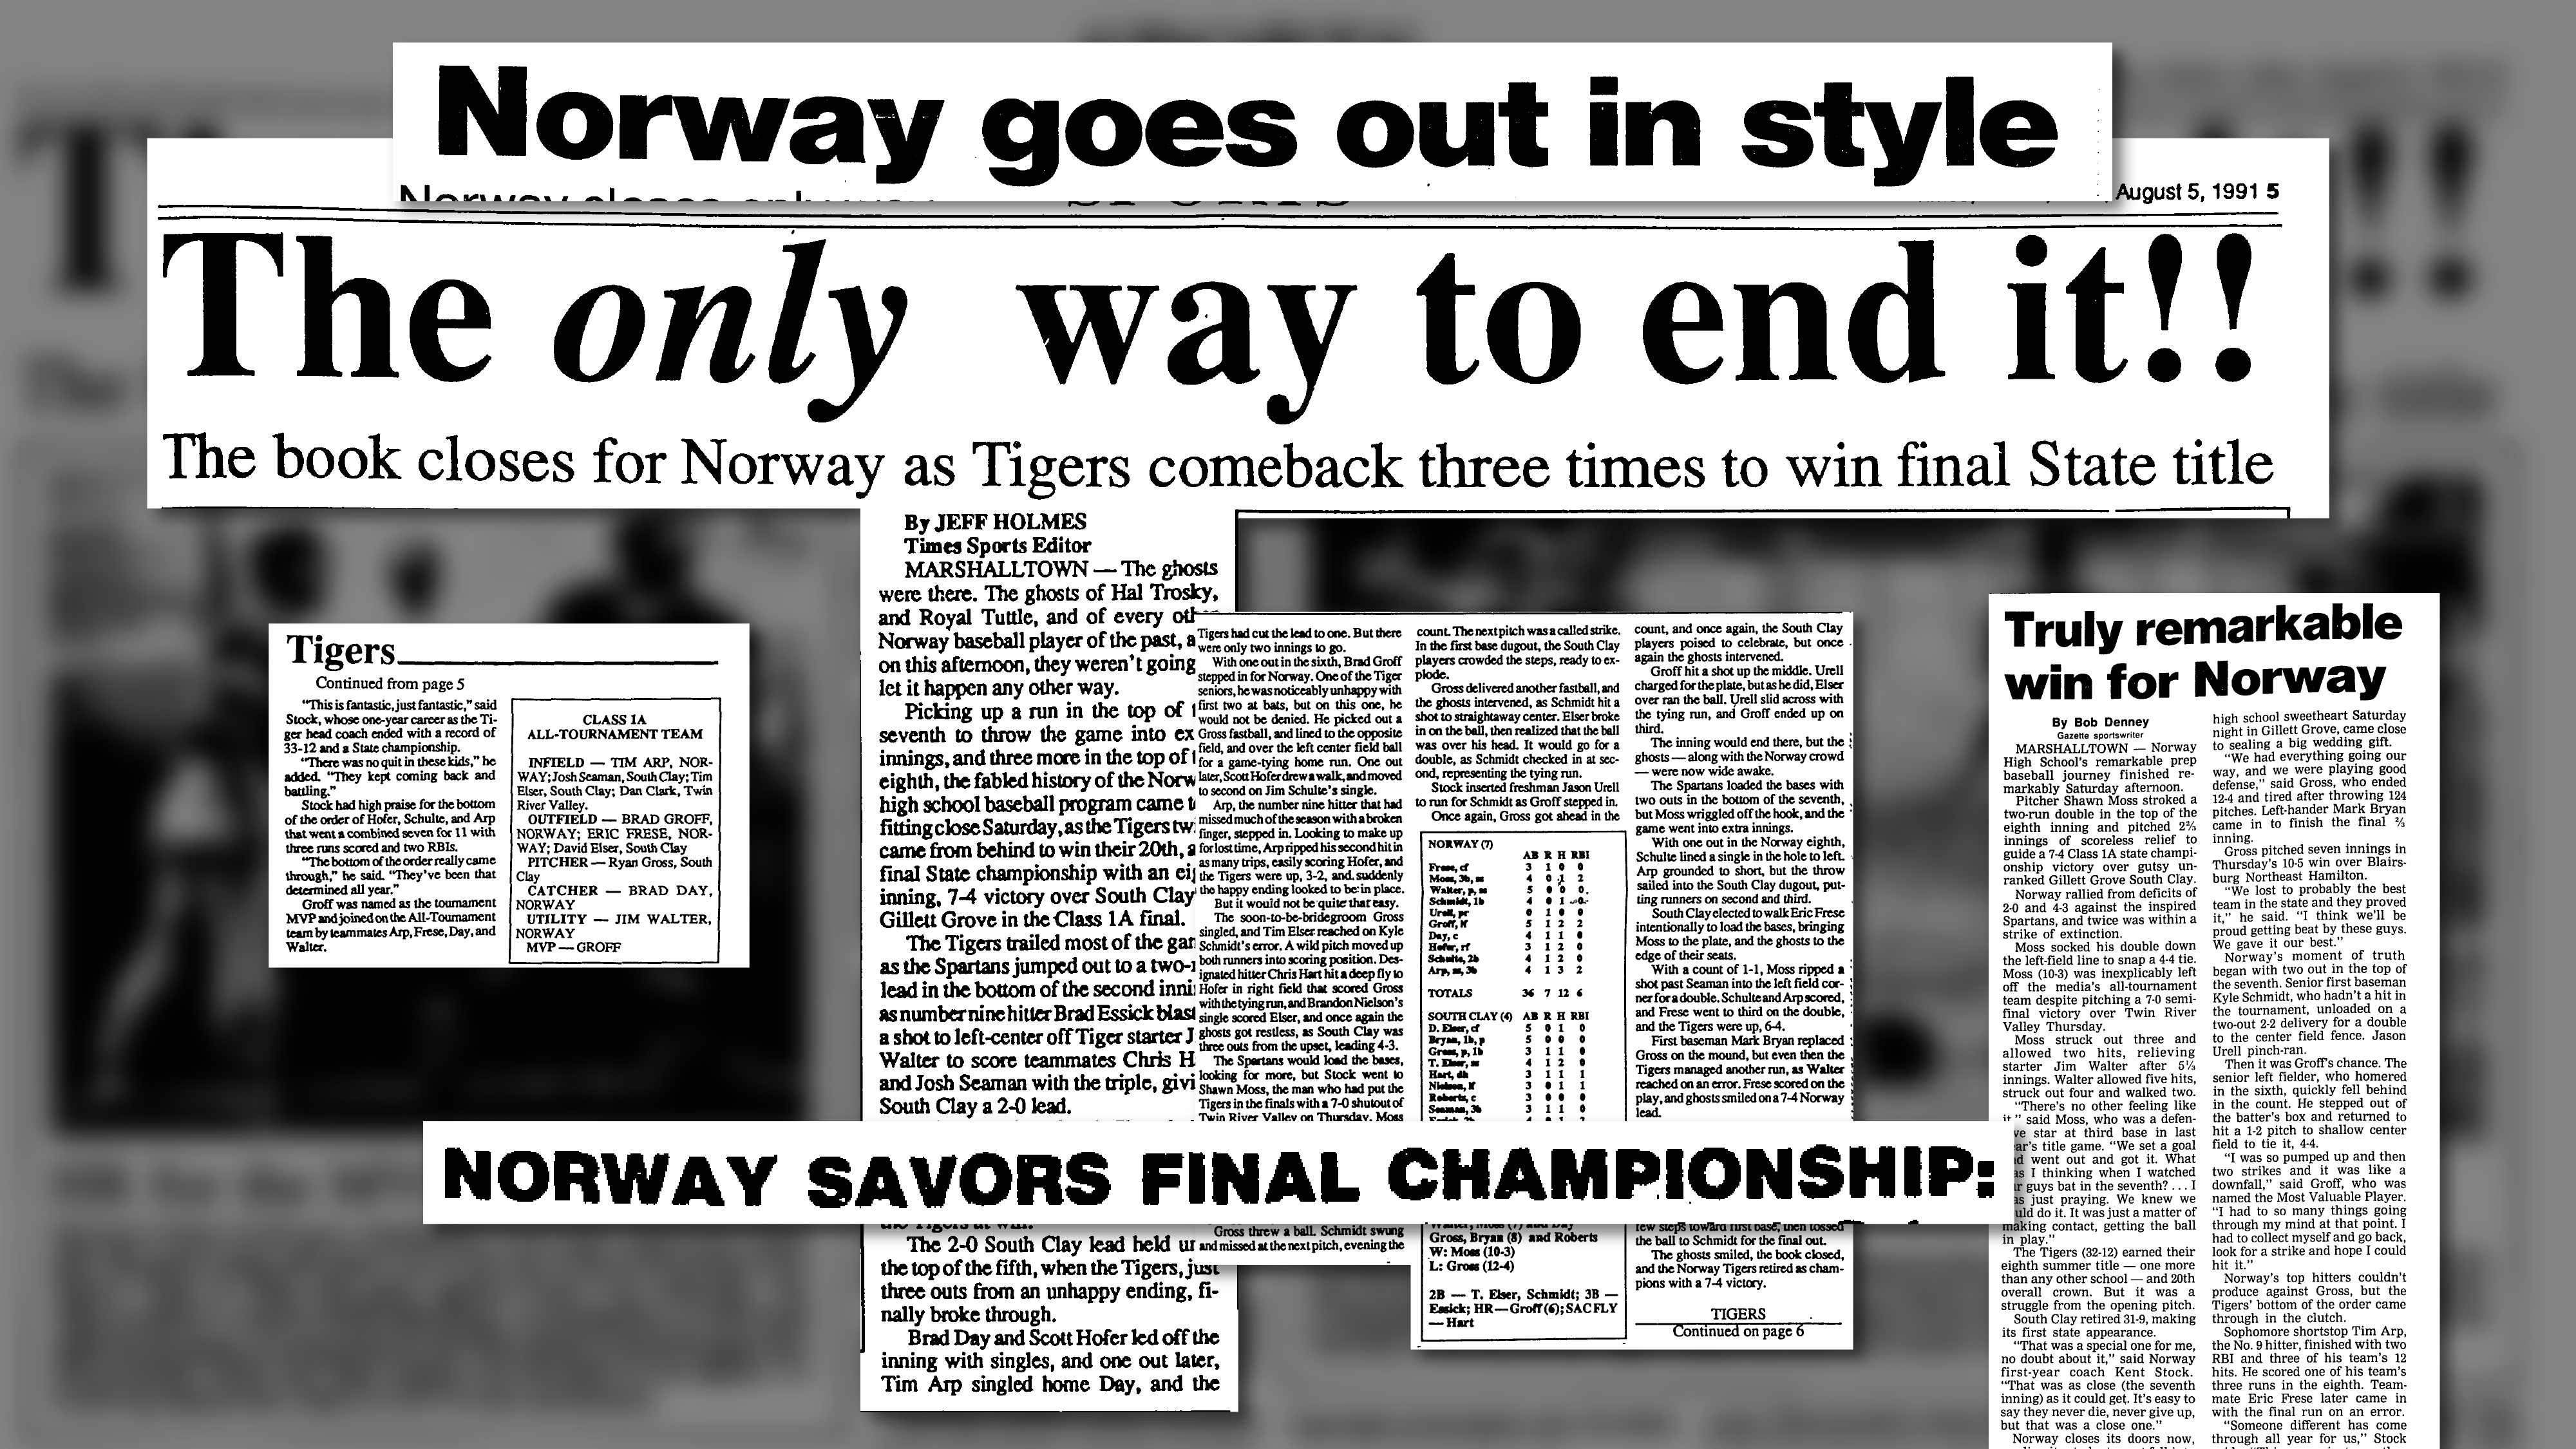 This Day in History: Norway Tigers’ Triumphant Finale – The Real Story Behind “The Final Season”